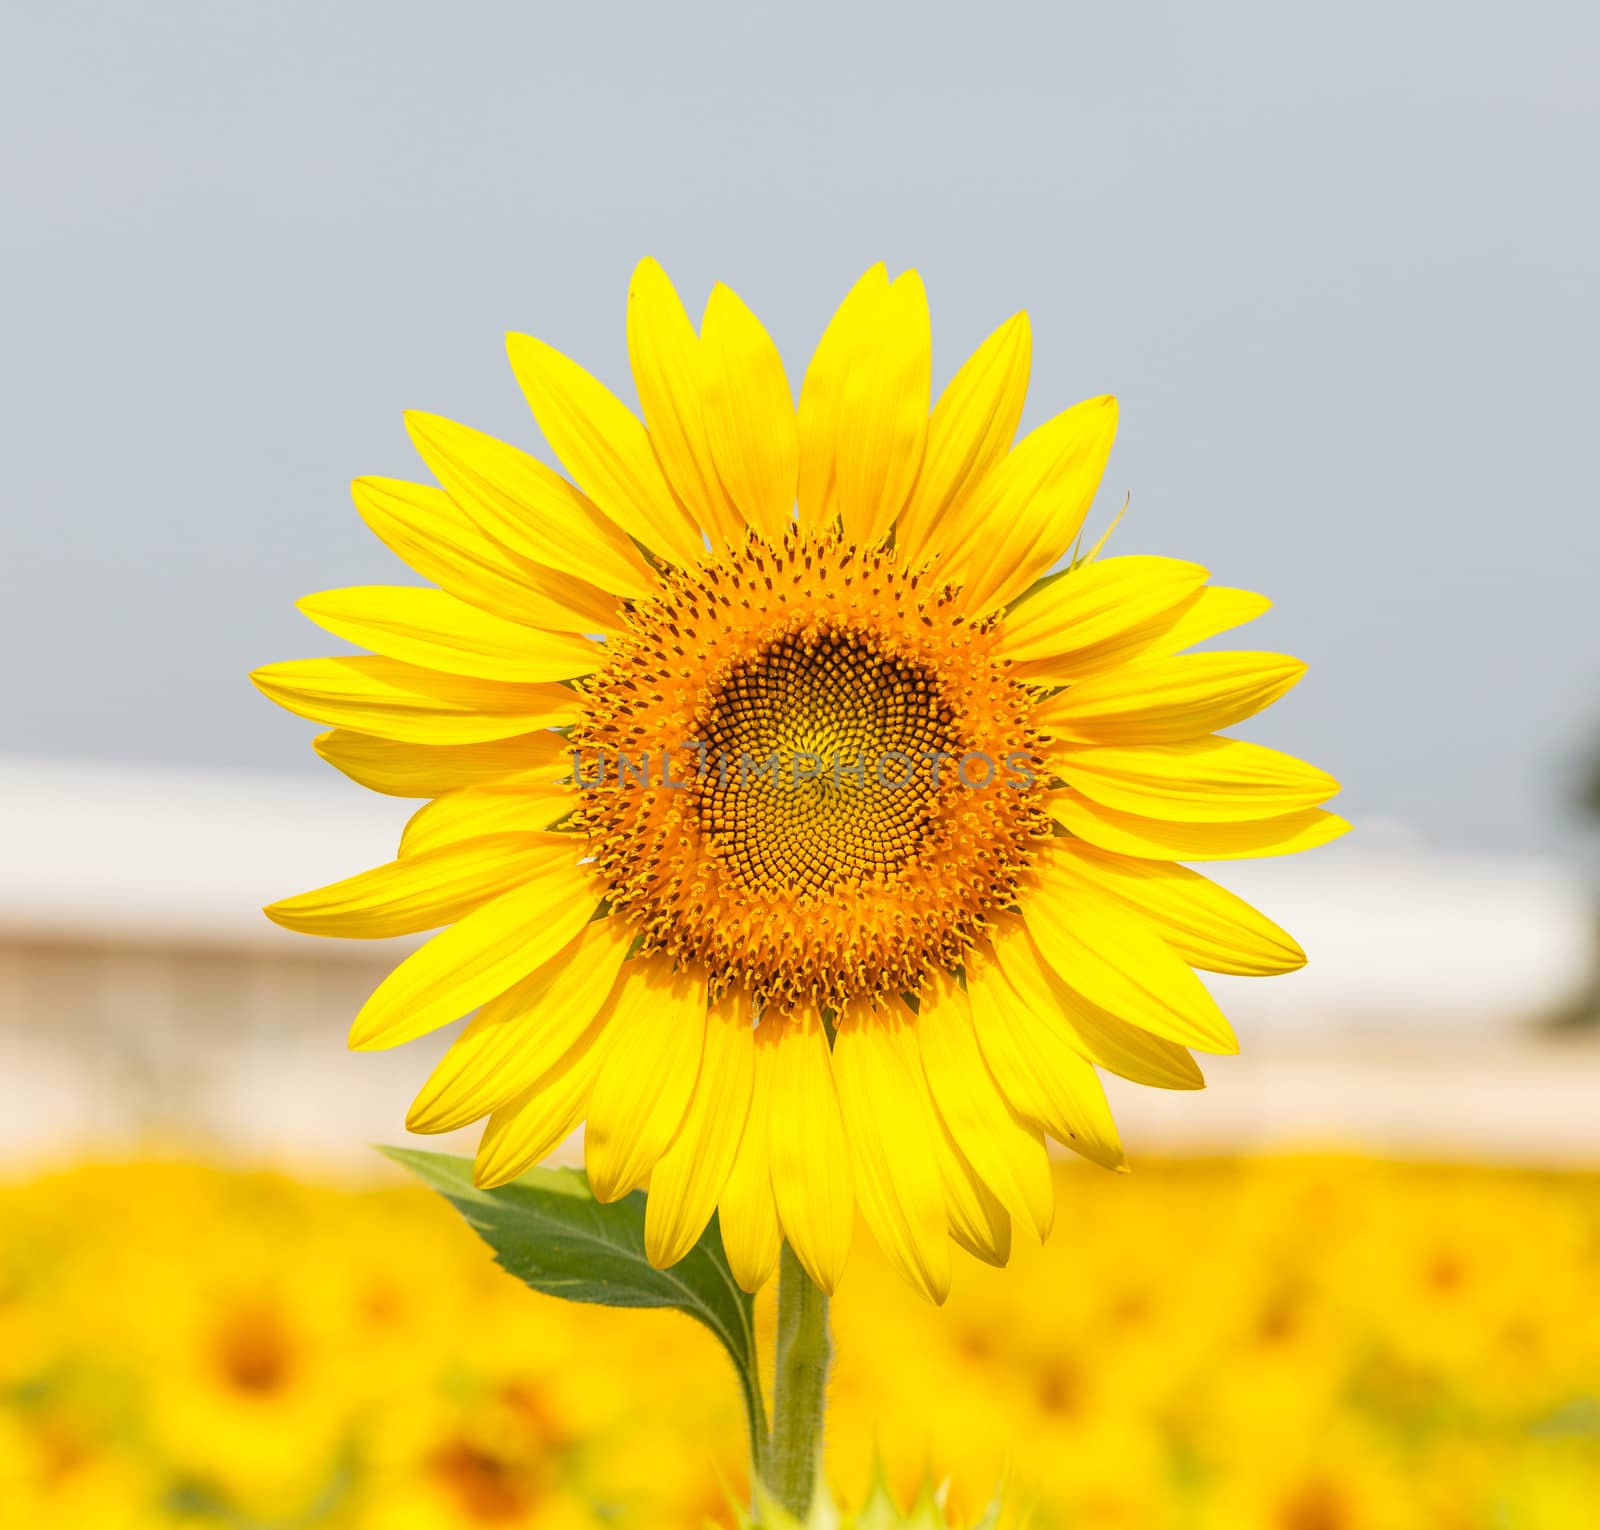 Beautiful yellow sunflower in the sun against  sky